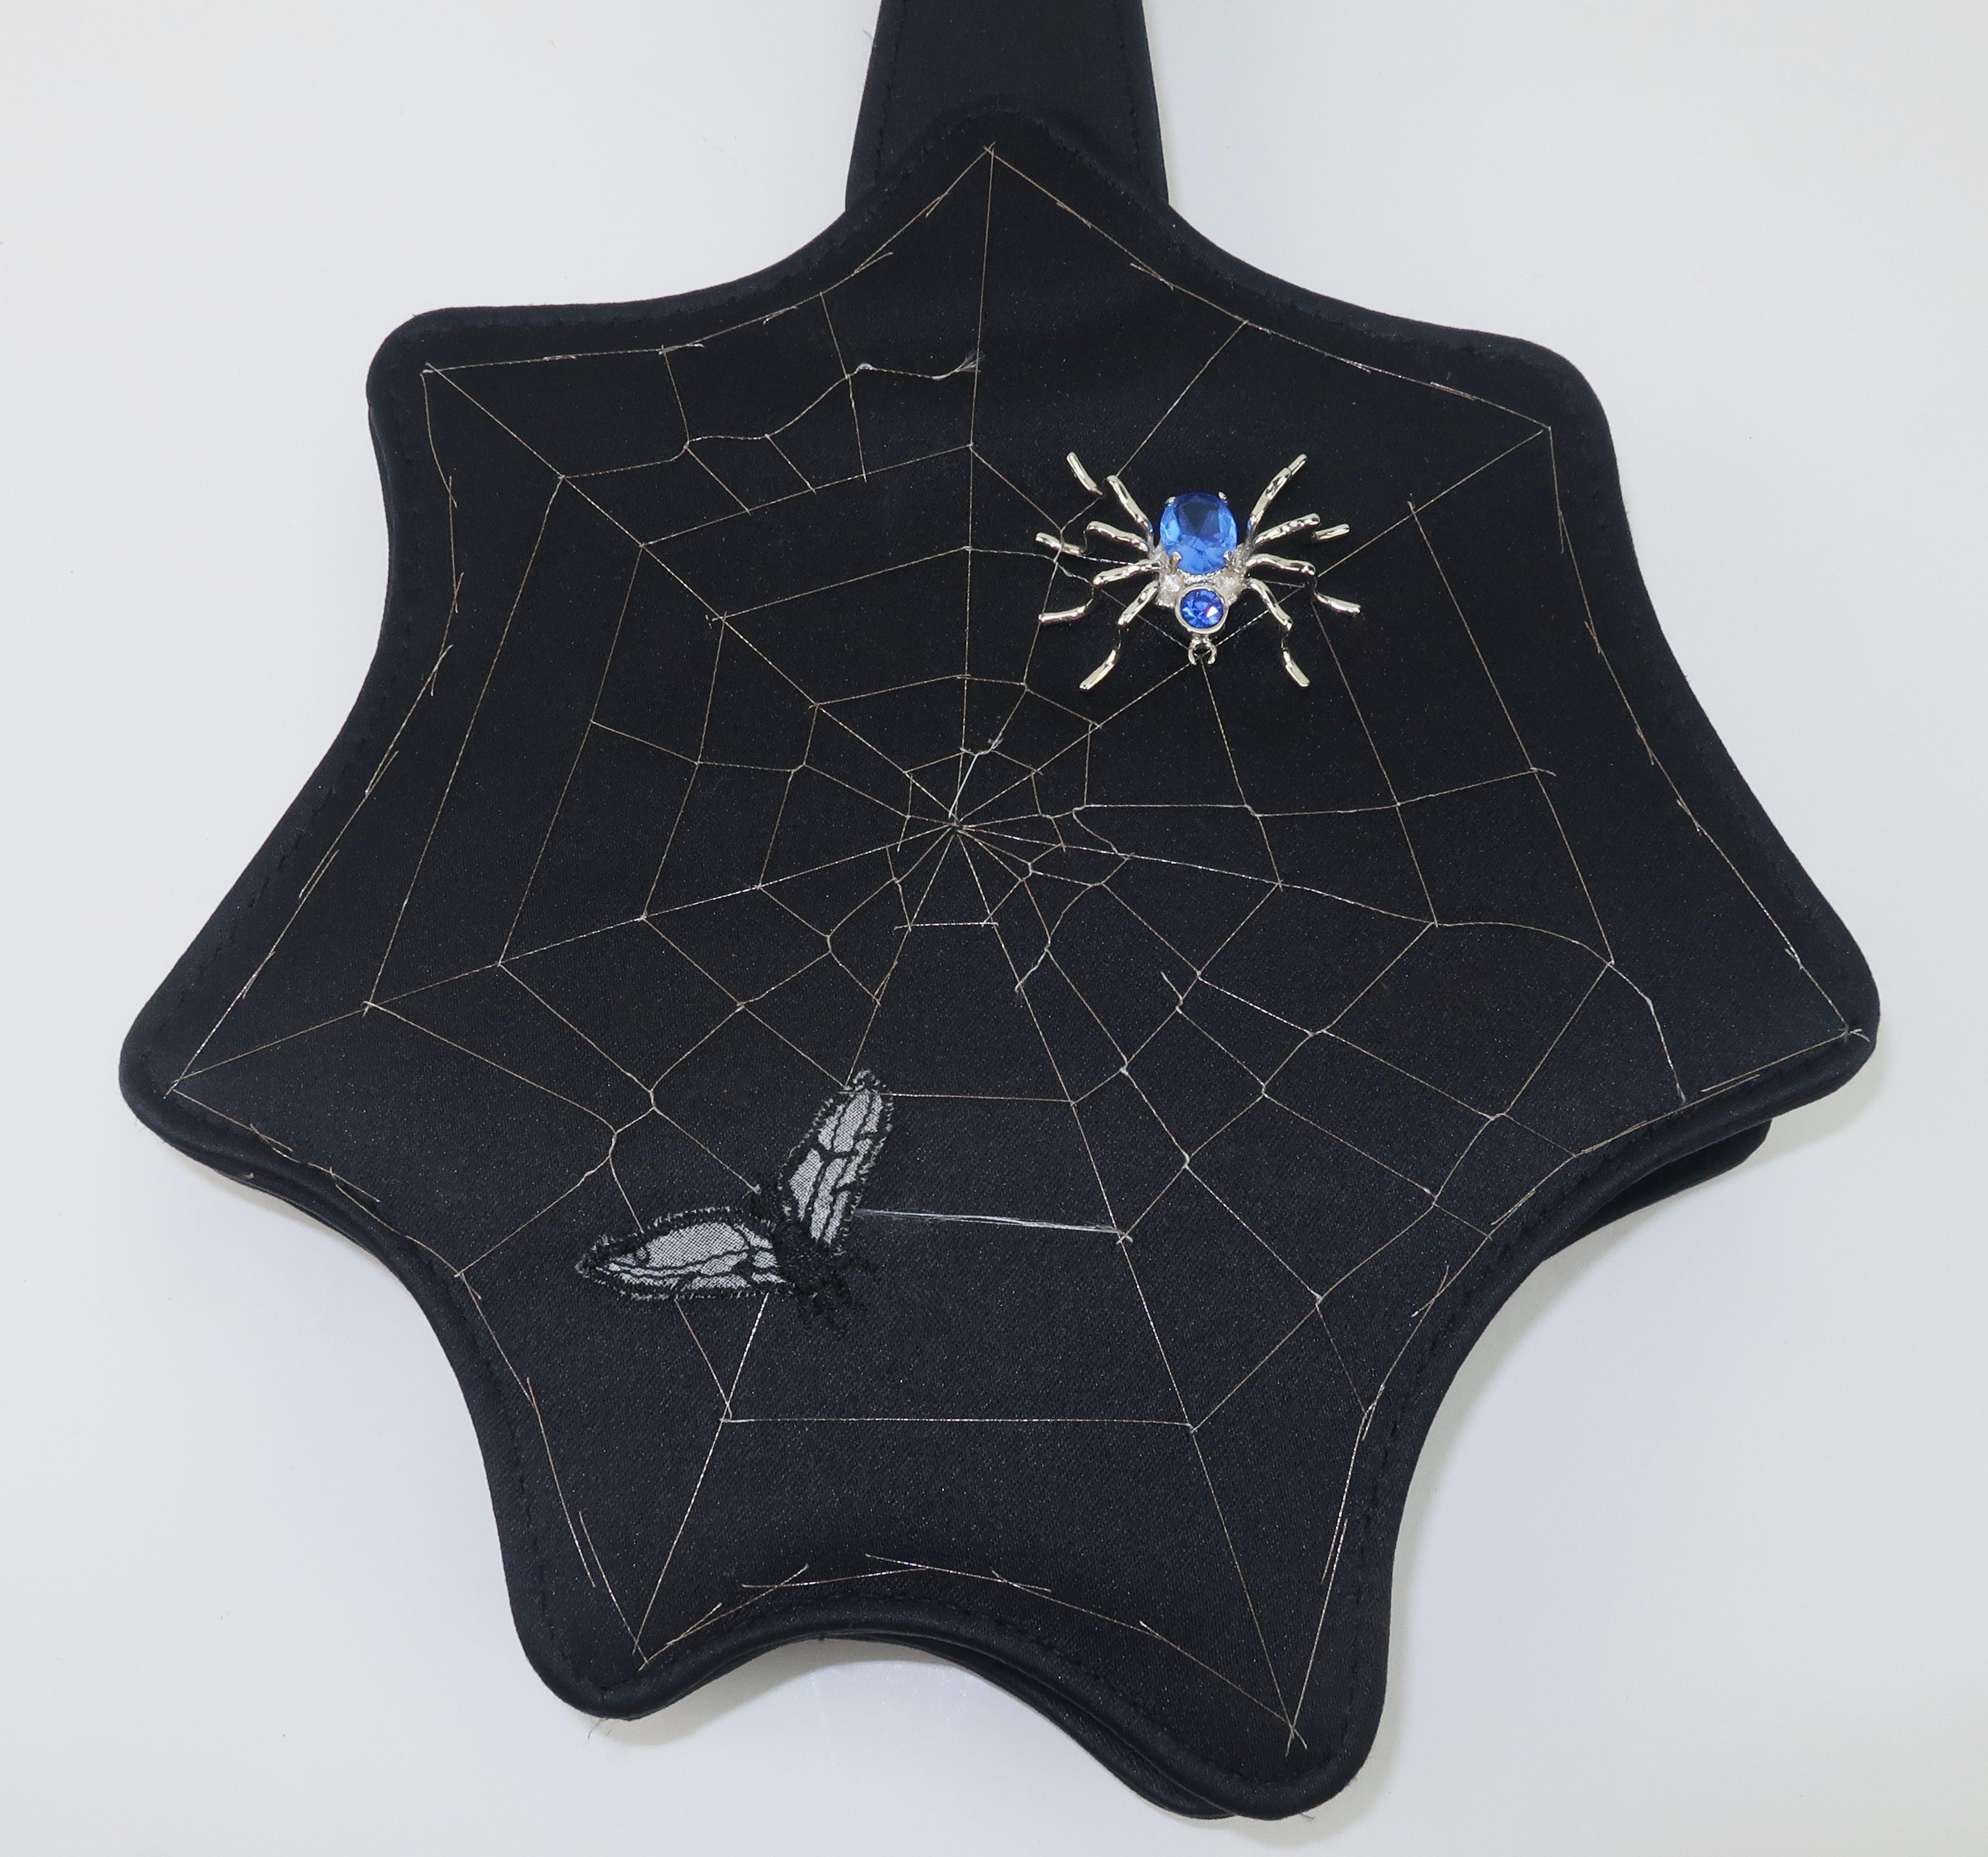 ‘Get yourself a great handbag and you've got yourself a friend for life’, and this little spider sitting in her web wants to be your friend!  The motto certainly fits for famed English handbag designer, Lulu Guinness, who has created unique pieces